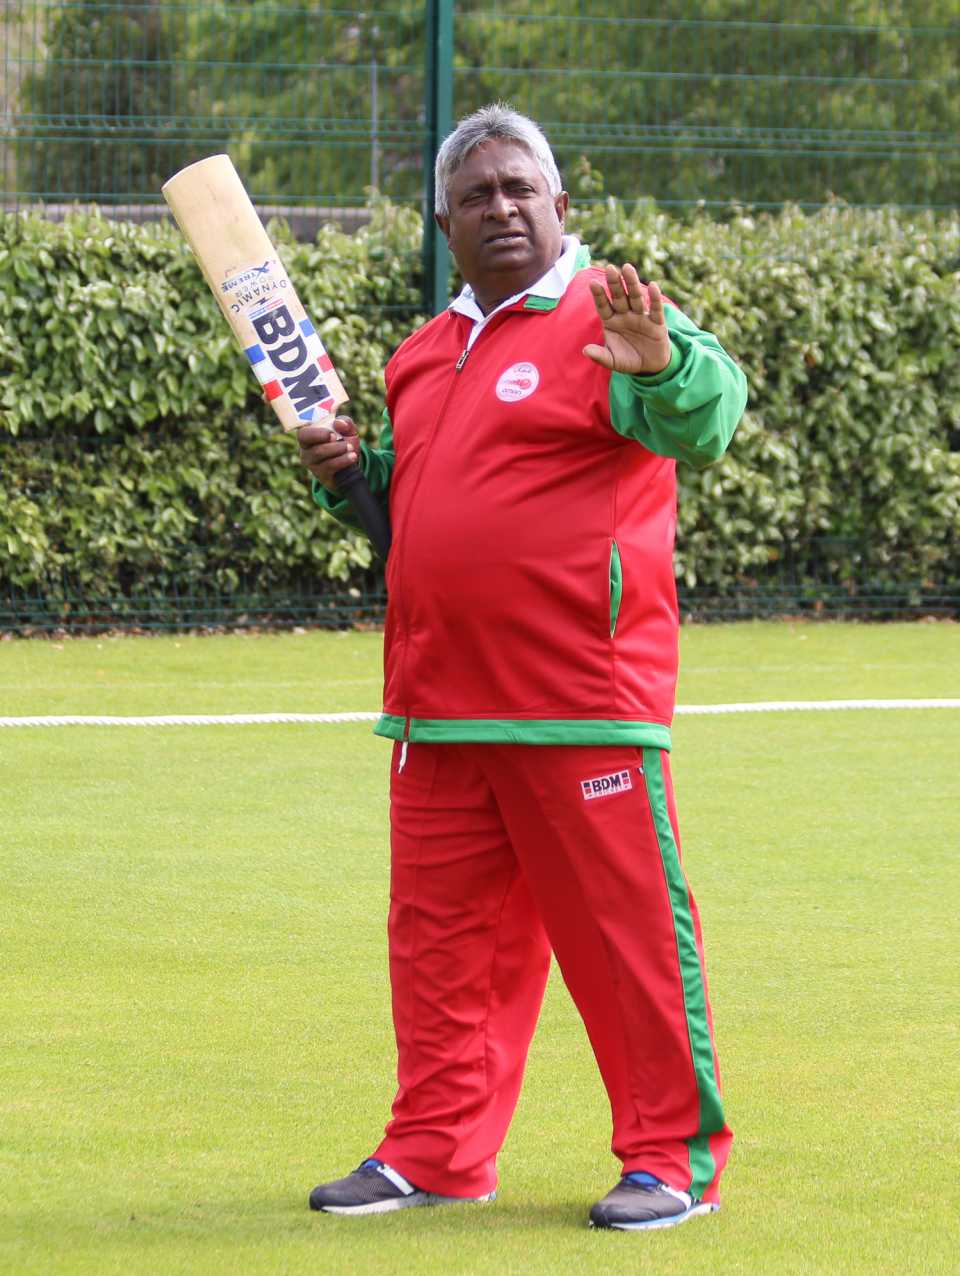 Oman coach Duleep Mendis goes through some instructions during warm-ups